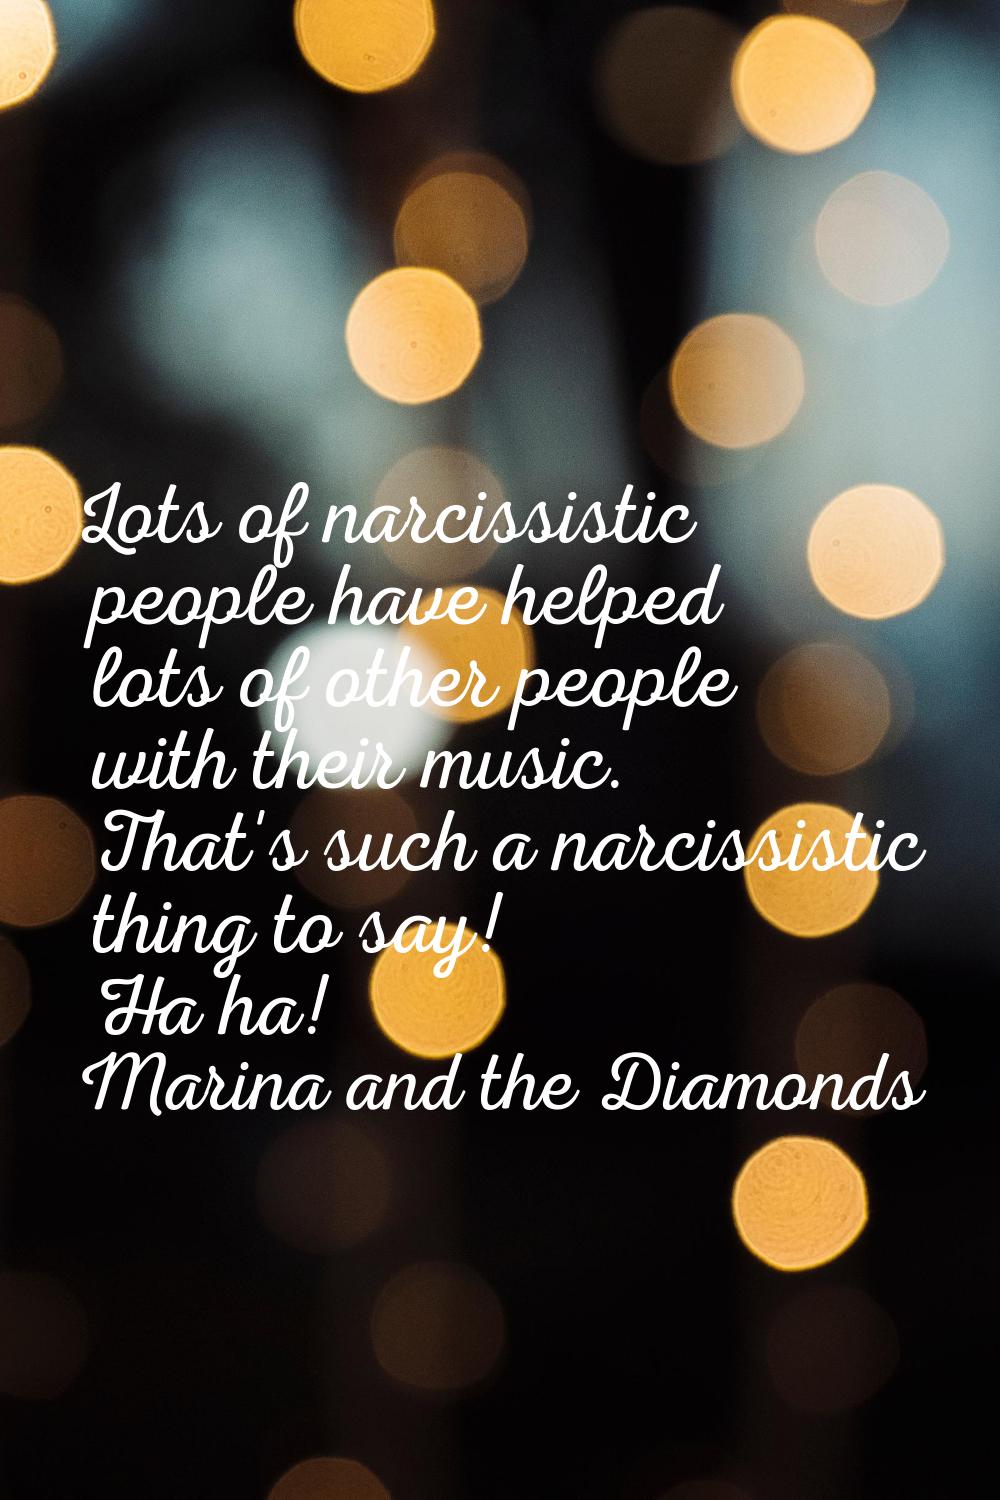 Lots of narcissistic people have helped lots of other people with their music. That's such a narcis